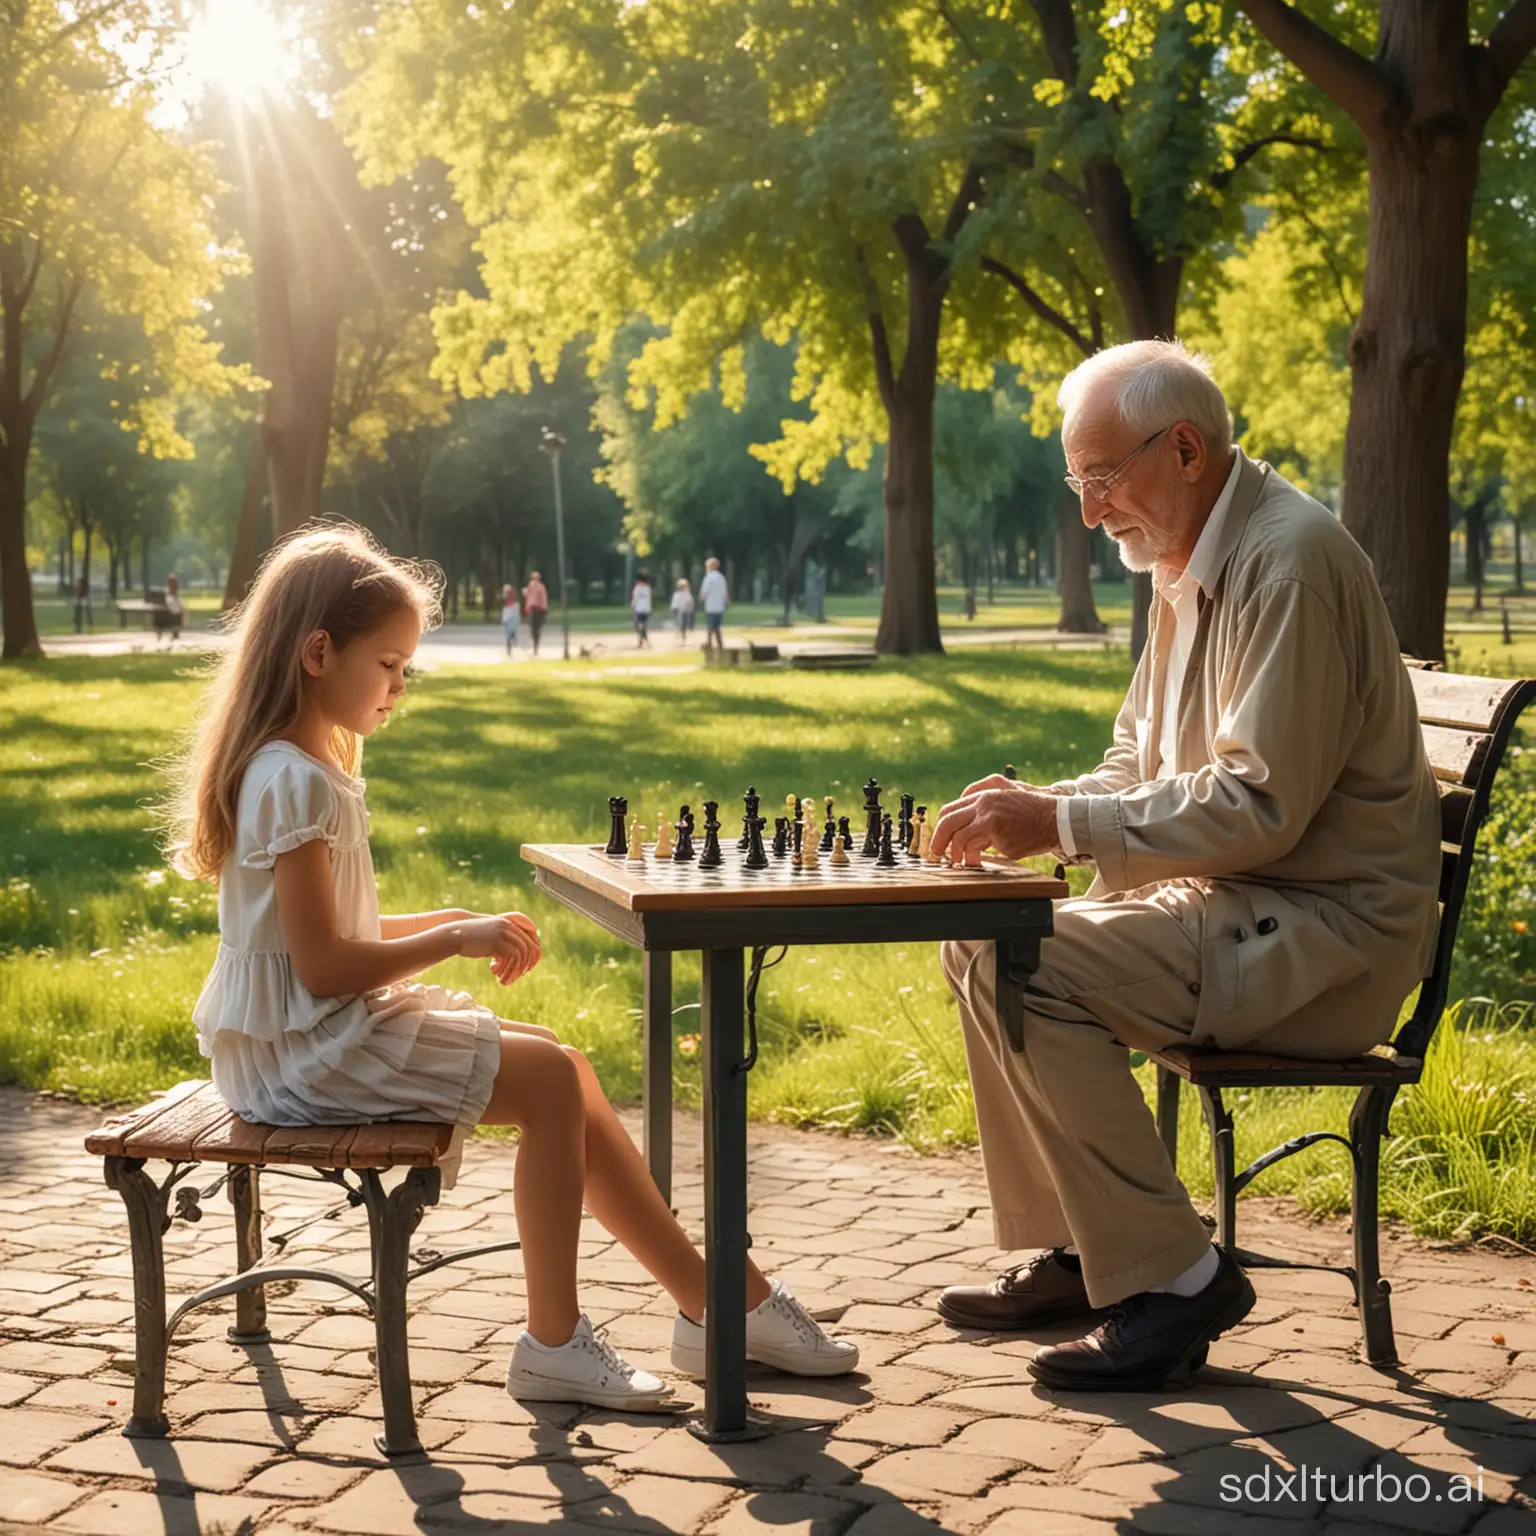 Intergenerational-Chess-Match-in-Sunlit-Park-Oasis